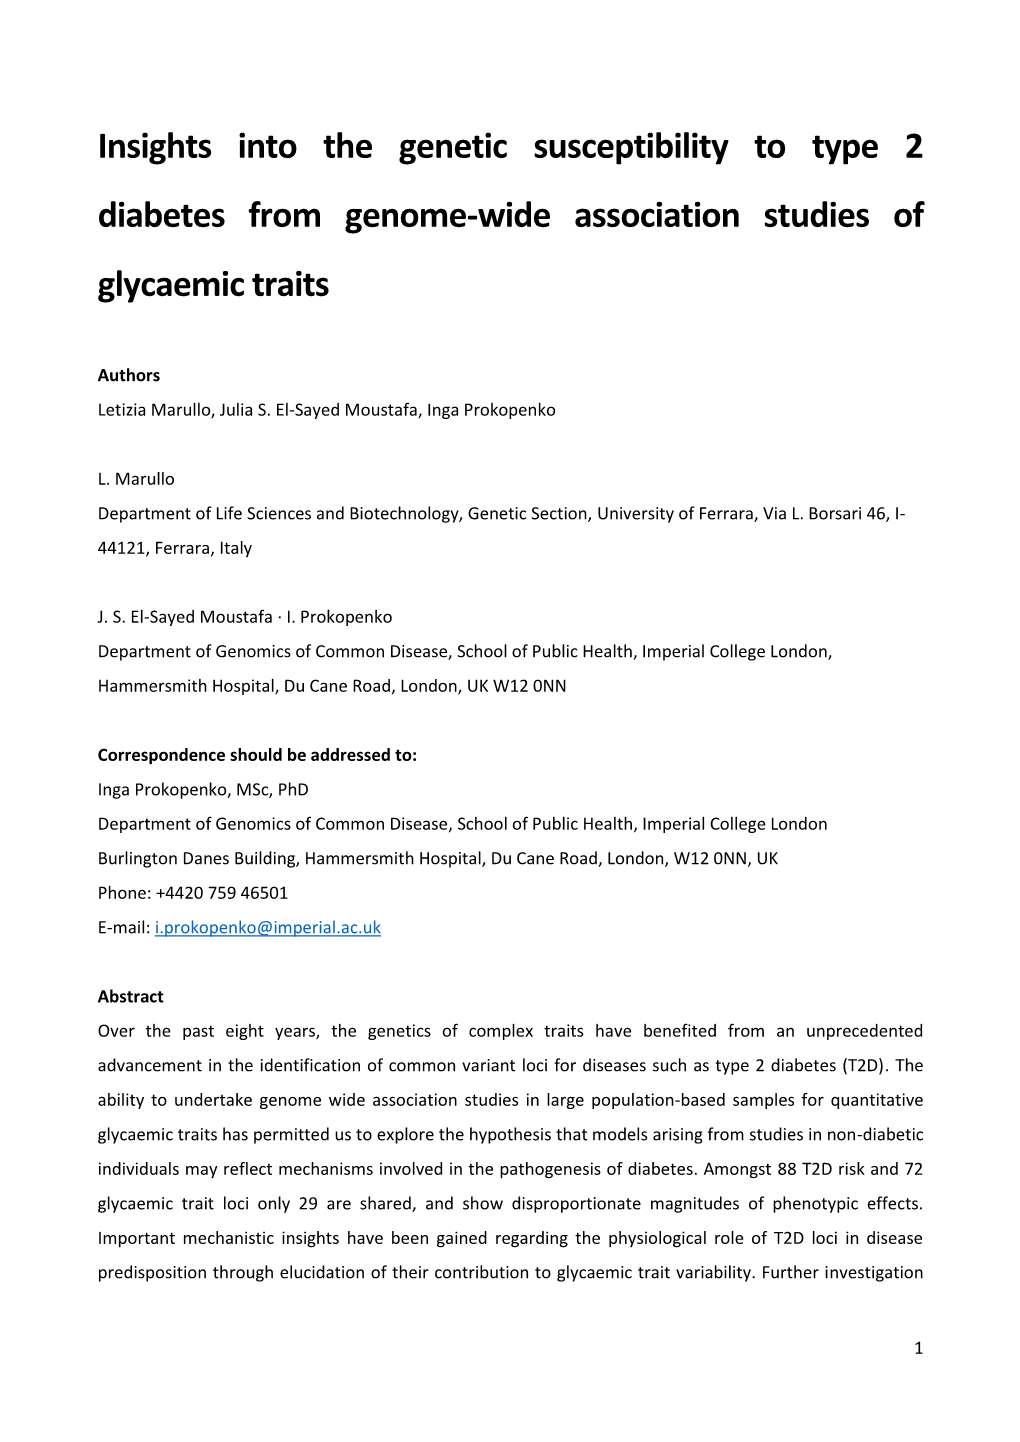 Insights Into the Genetic Susceptibility to Type 2 Diabetes from Genome-Wide Association Studies of Glycaemic Traits